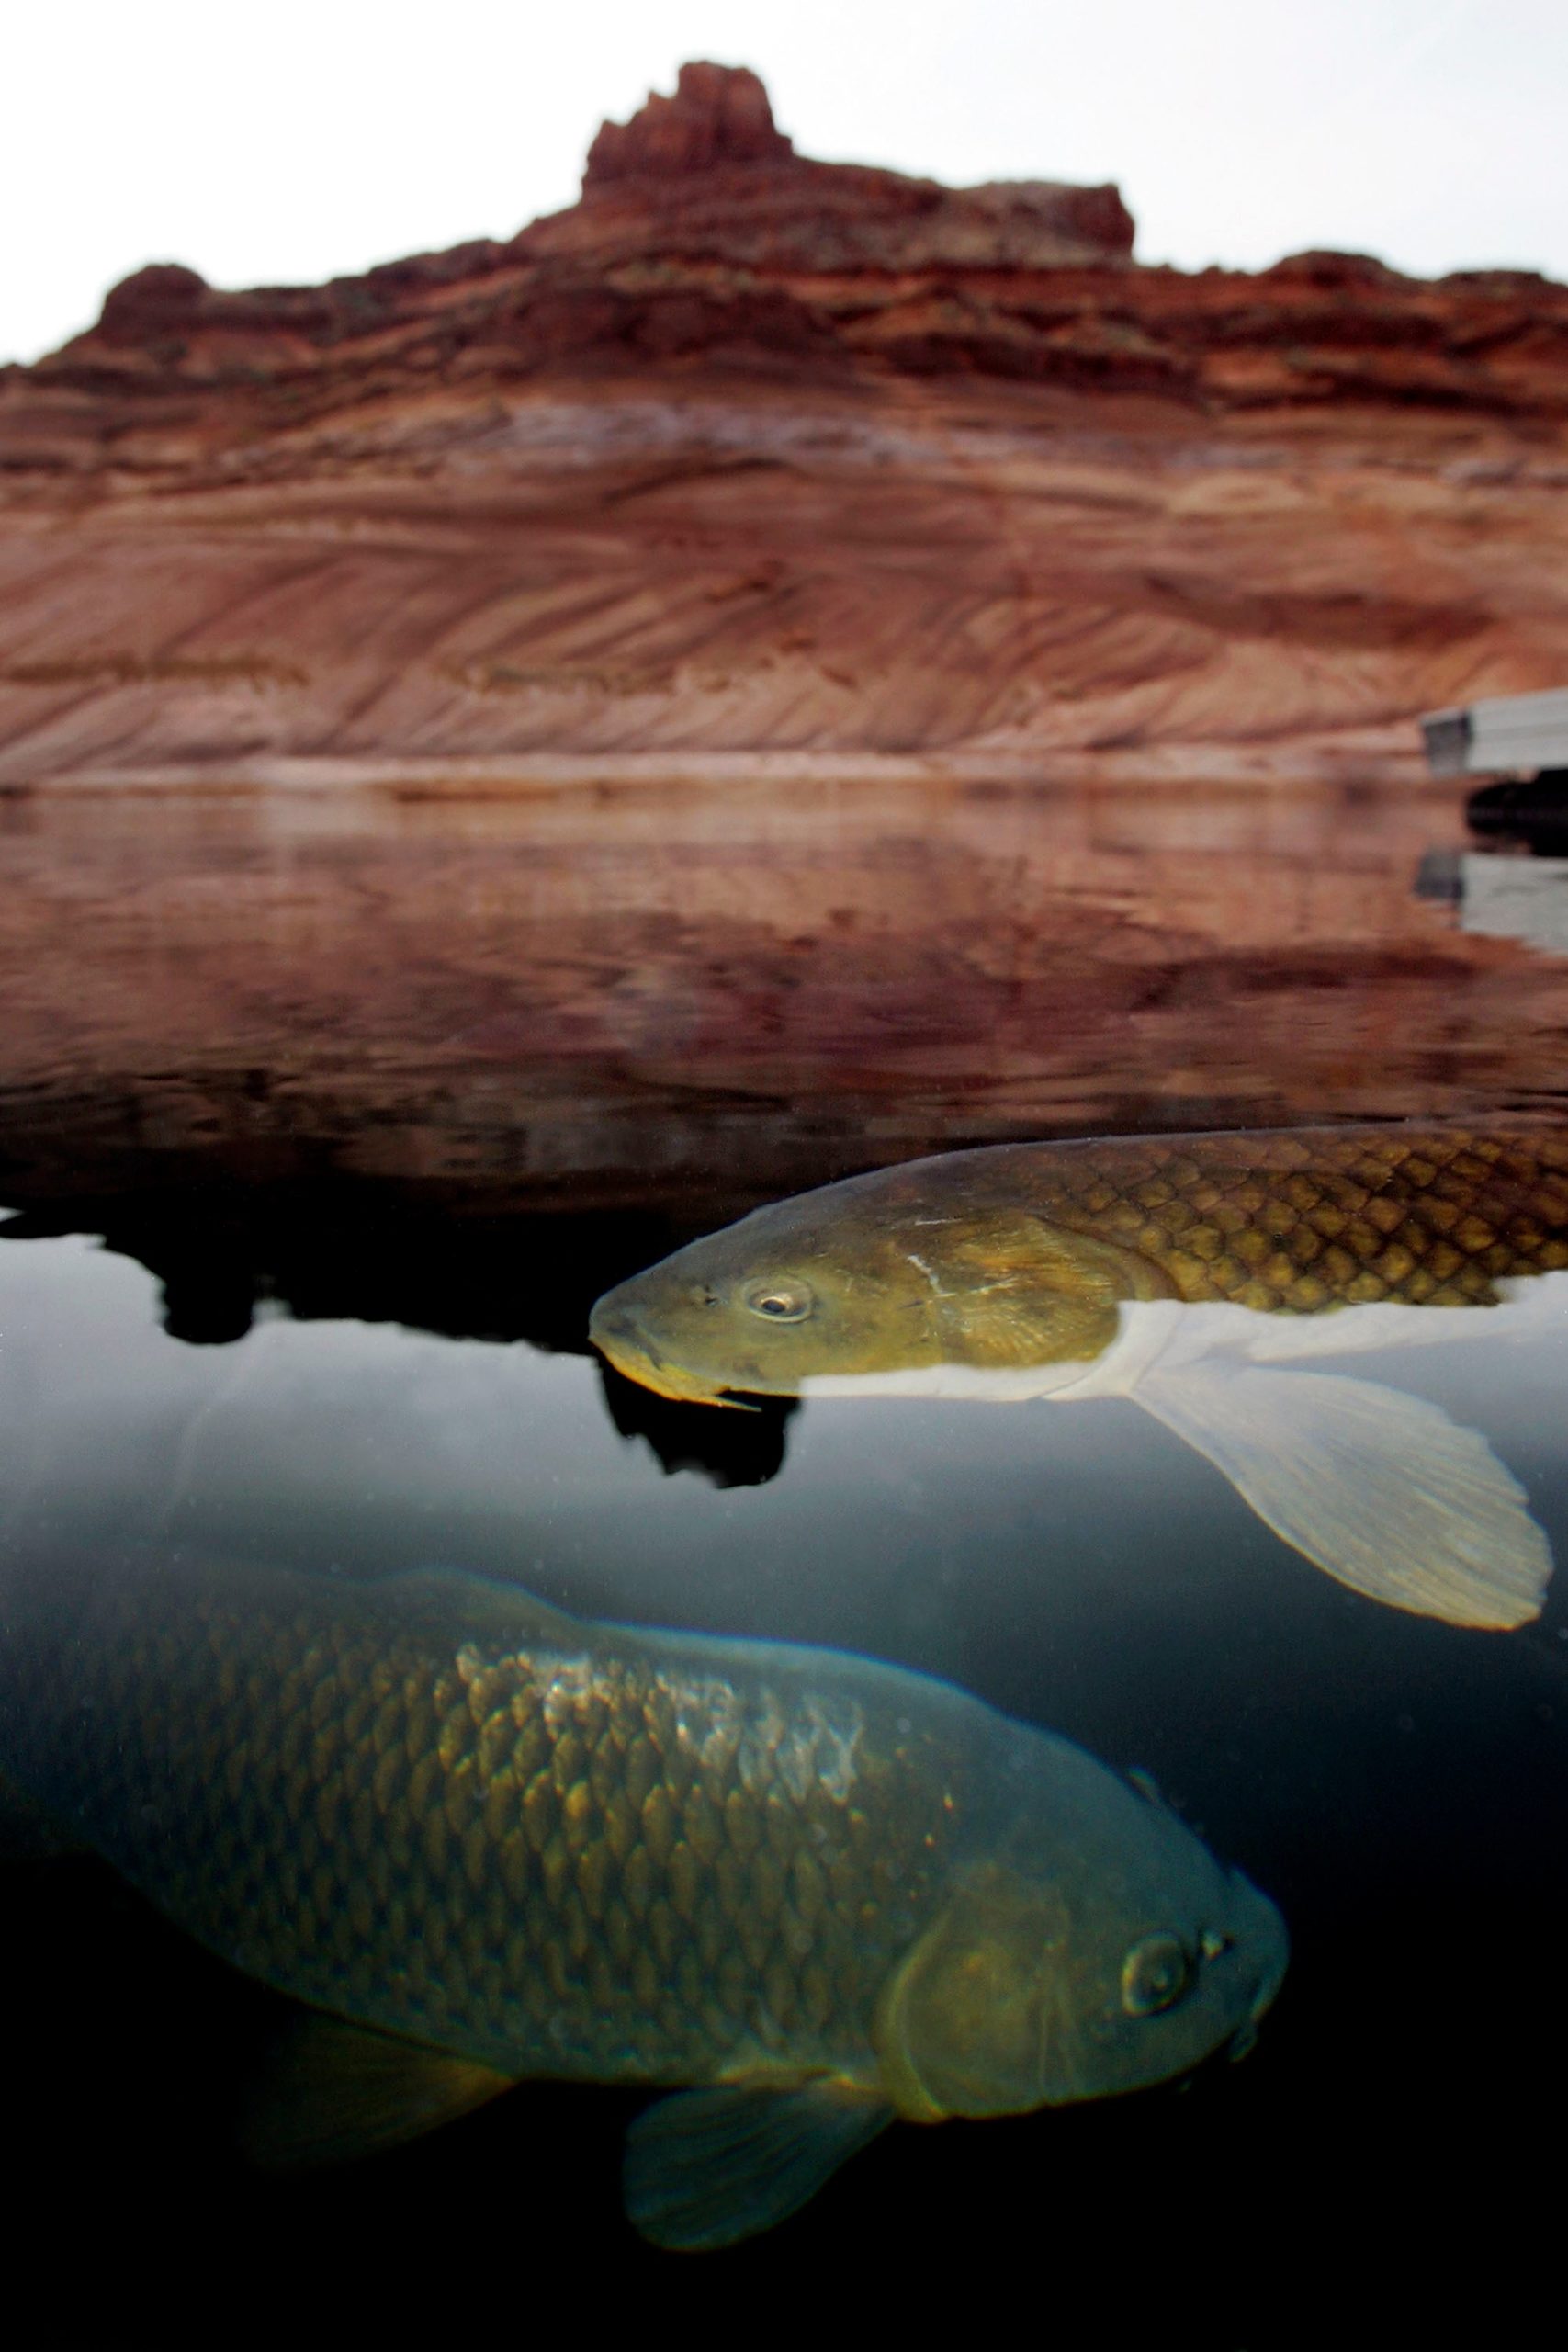 Carp surface at Dangling Rope Marina, reachable only by boat 69 km from Glen Canyon Dam, at Lake Powell on March 26, 2007 near Page, Arizona. (Photo: David McNew, Getty Images)